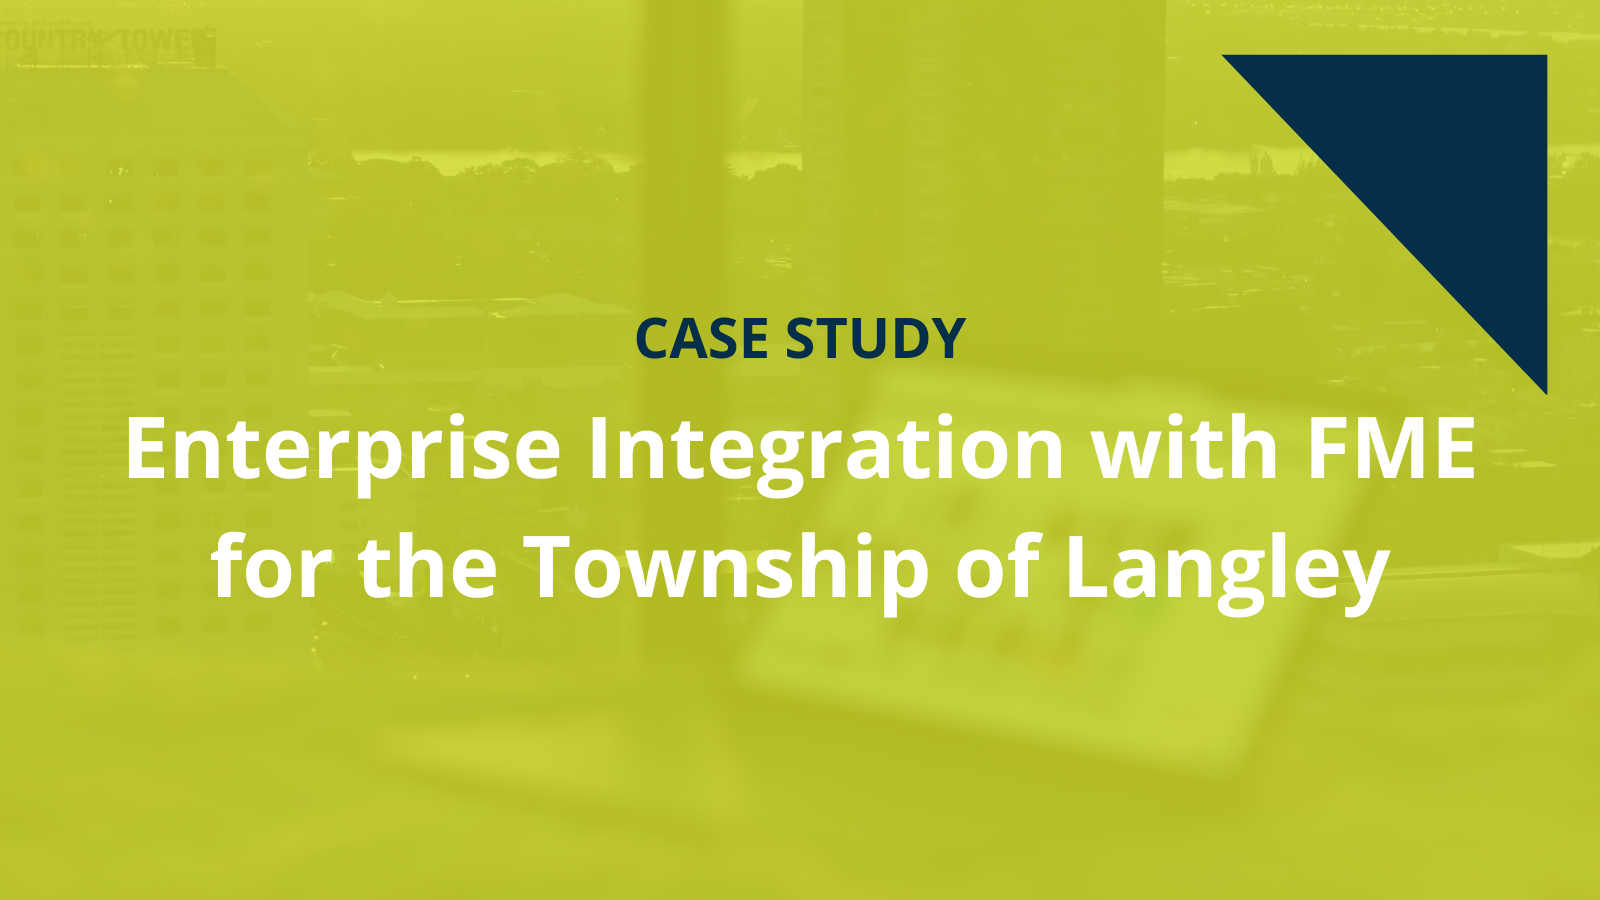 Enterprise Integration with FME for the Township of Langley